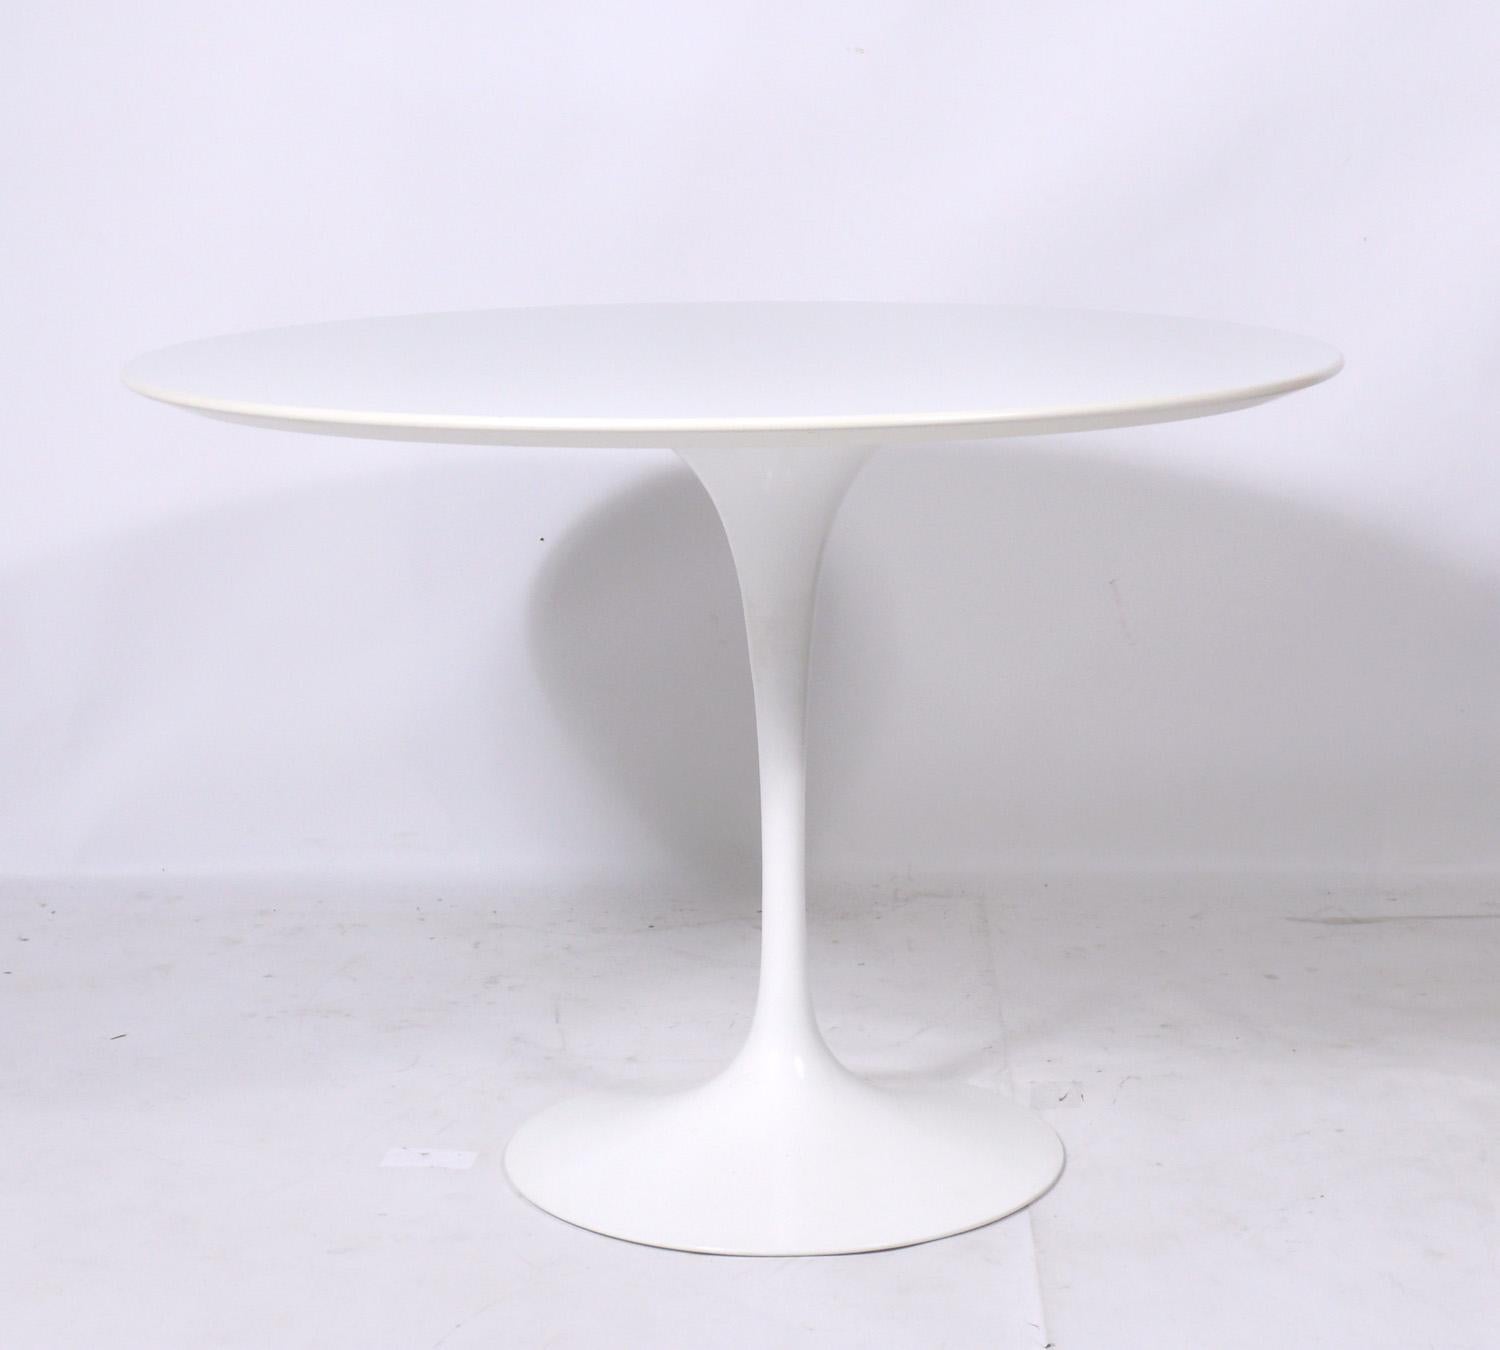 Sculptural dining table, designed by Eero Saarinen for Knoll, American, circa 2000s. Measure: 42